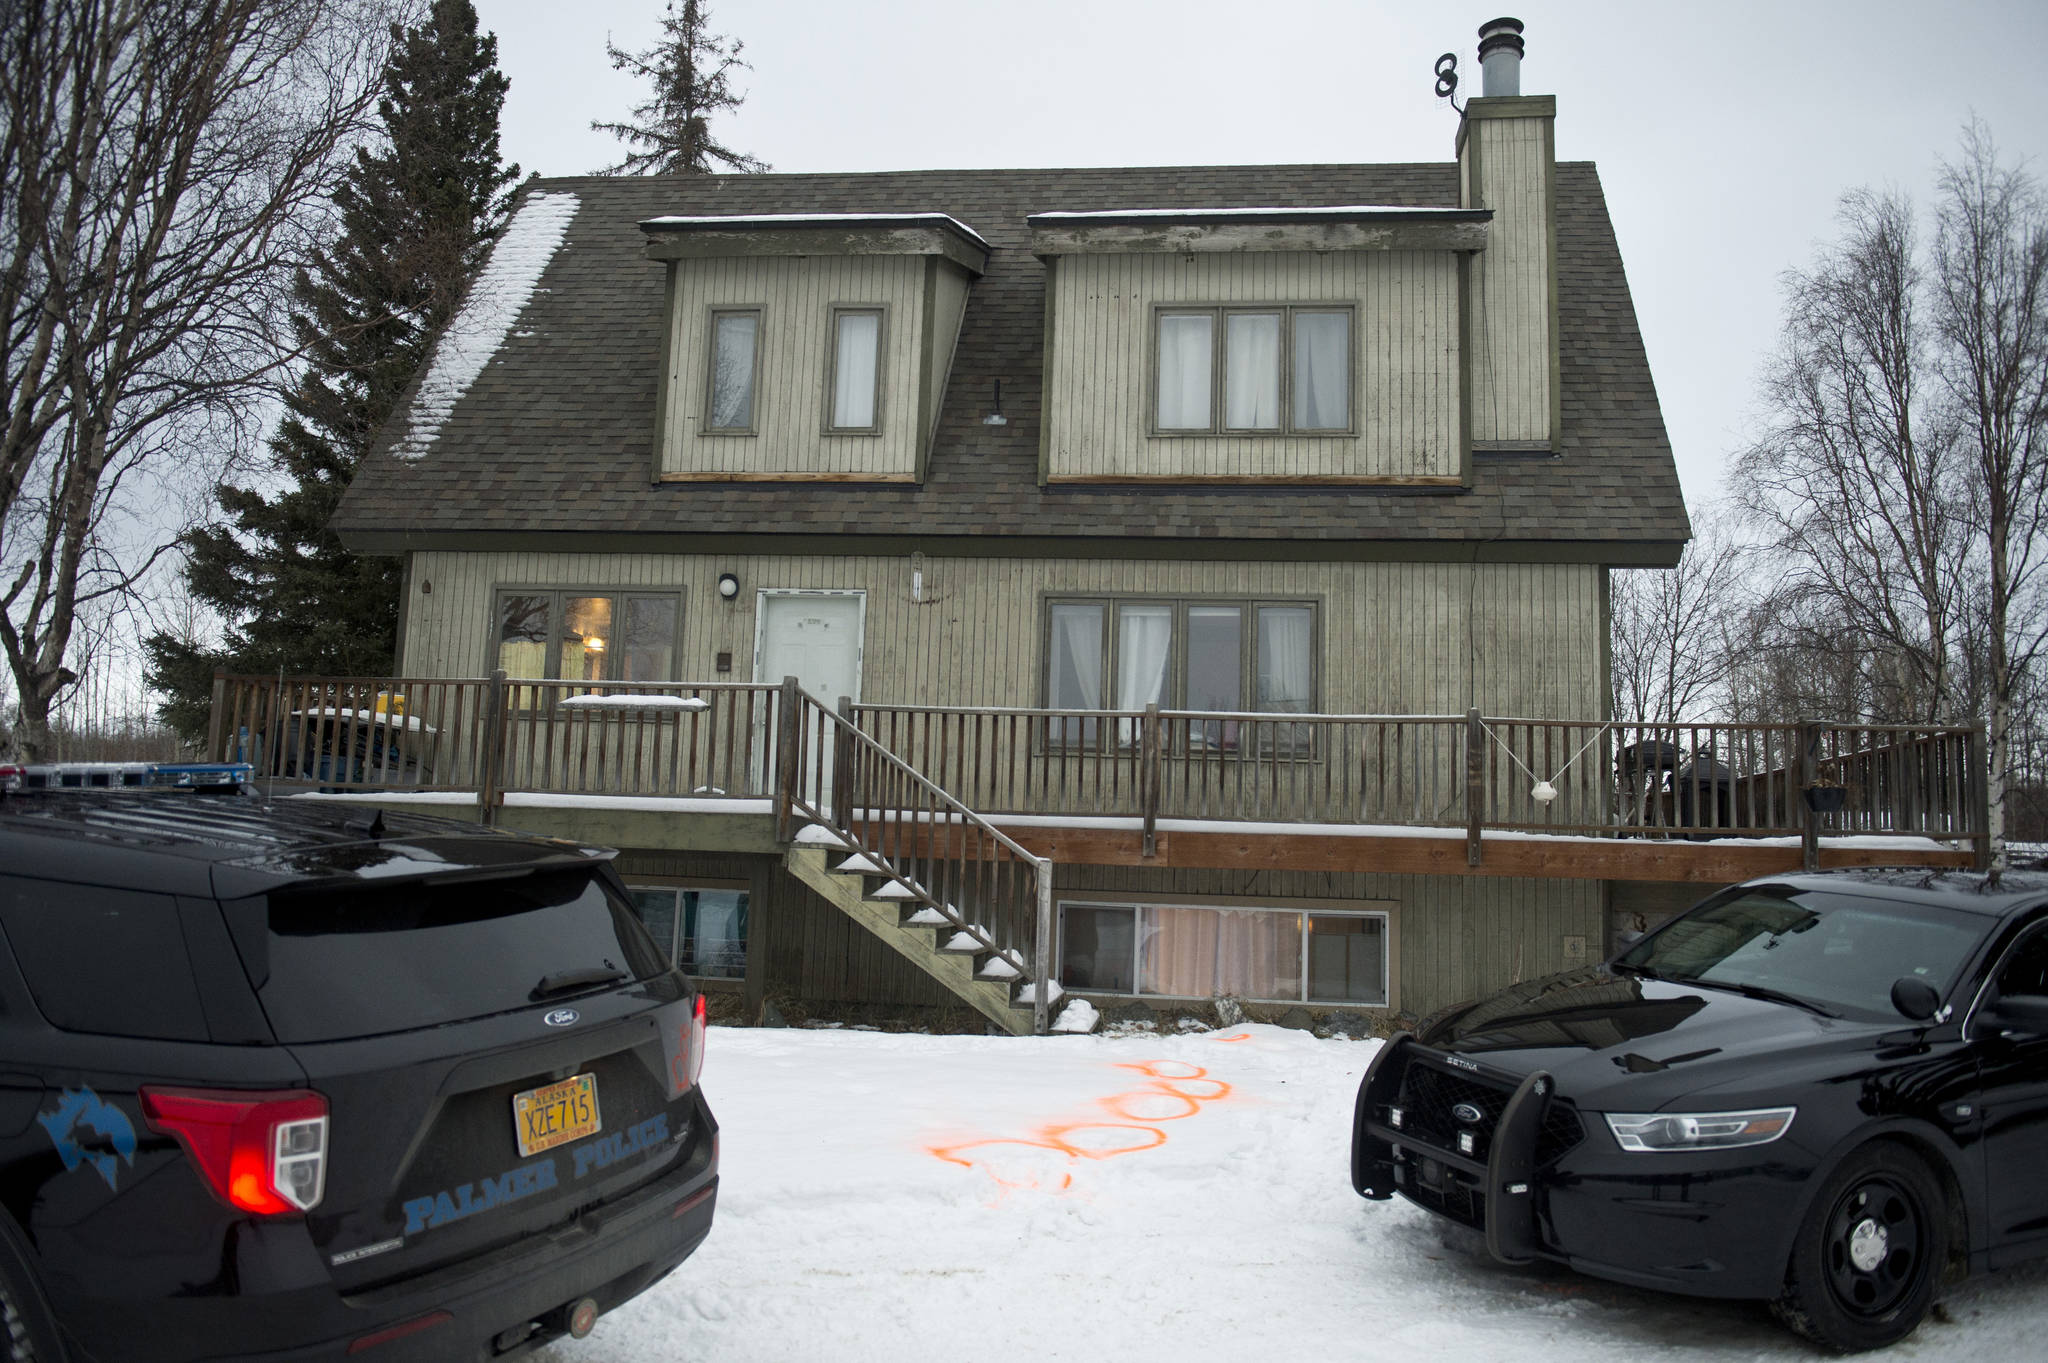 Alaska State Troopers investigate a fatal shooting scene at a home on North Valley Way in Palmer, Alaska, Monday, Nov. 30, 2020. An 18-year-old Alaska man just out of jail for assaulting a family member has been charged with killing four members of his family, including two cousins under the age of 10, charging documents released Tuesday, Dec. 1, 2020 said. (Marc Lester / Anchorage Daily News)